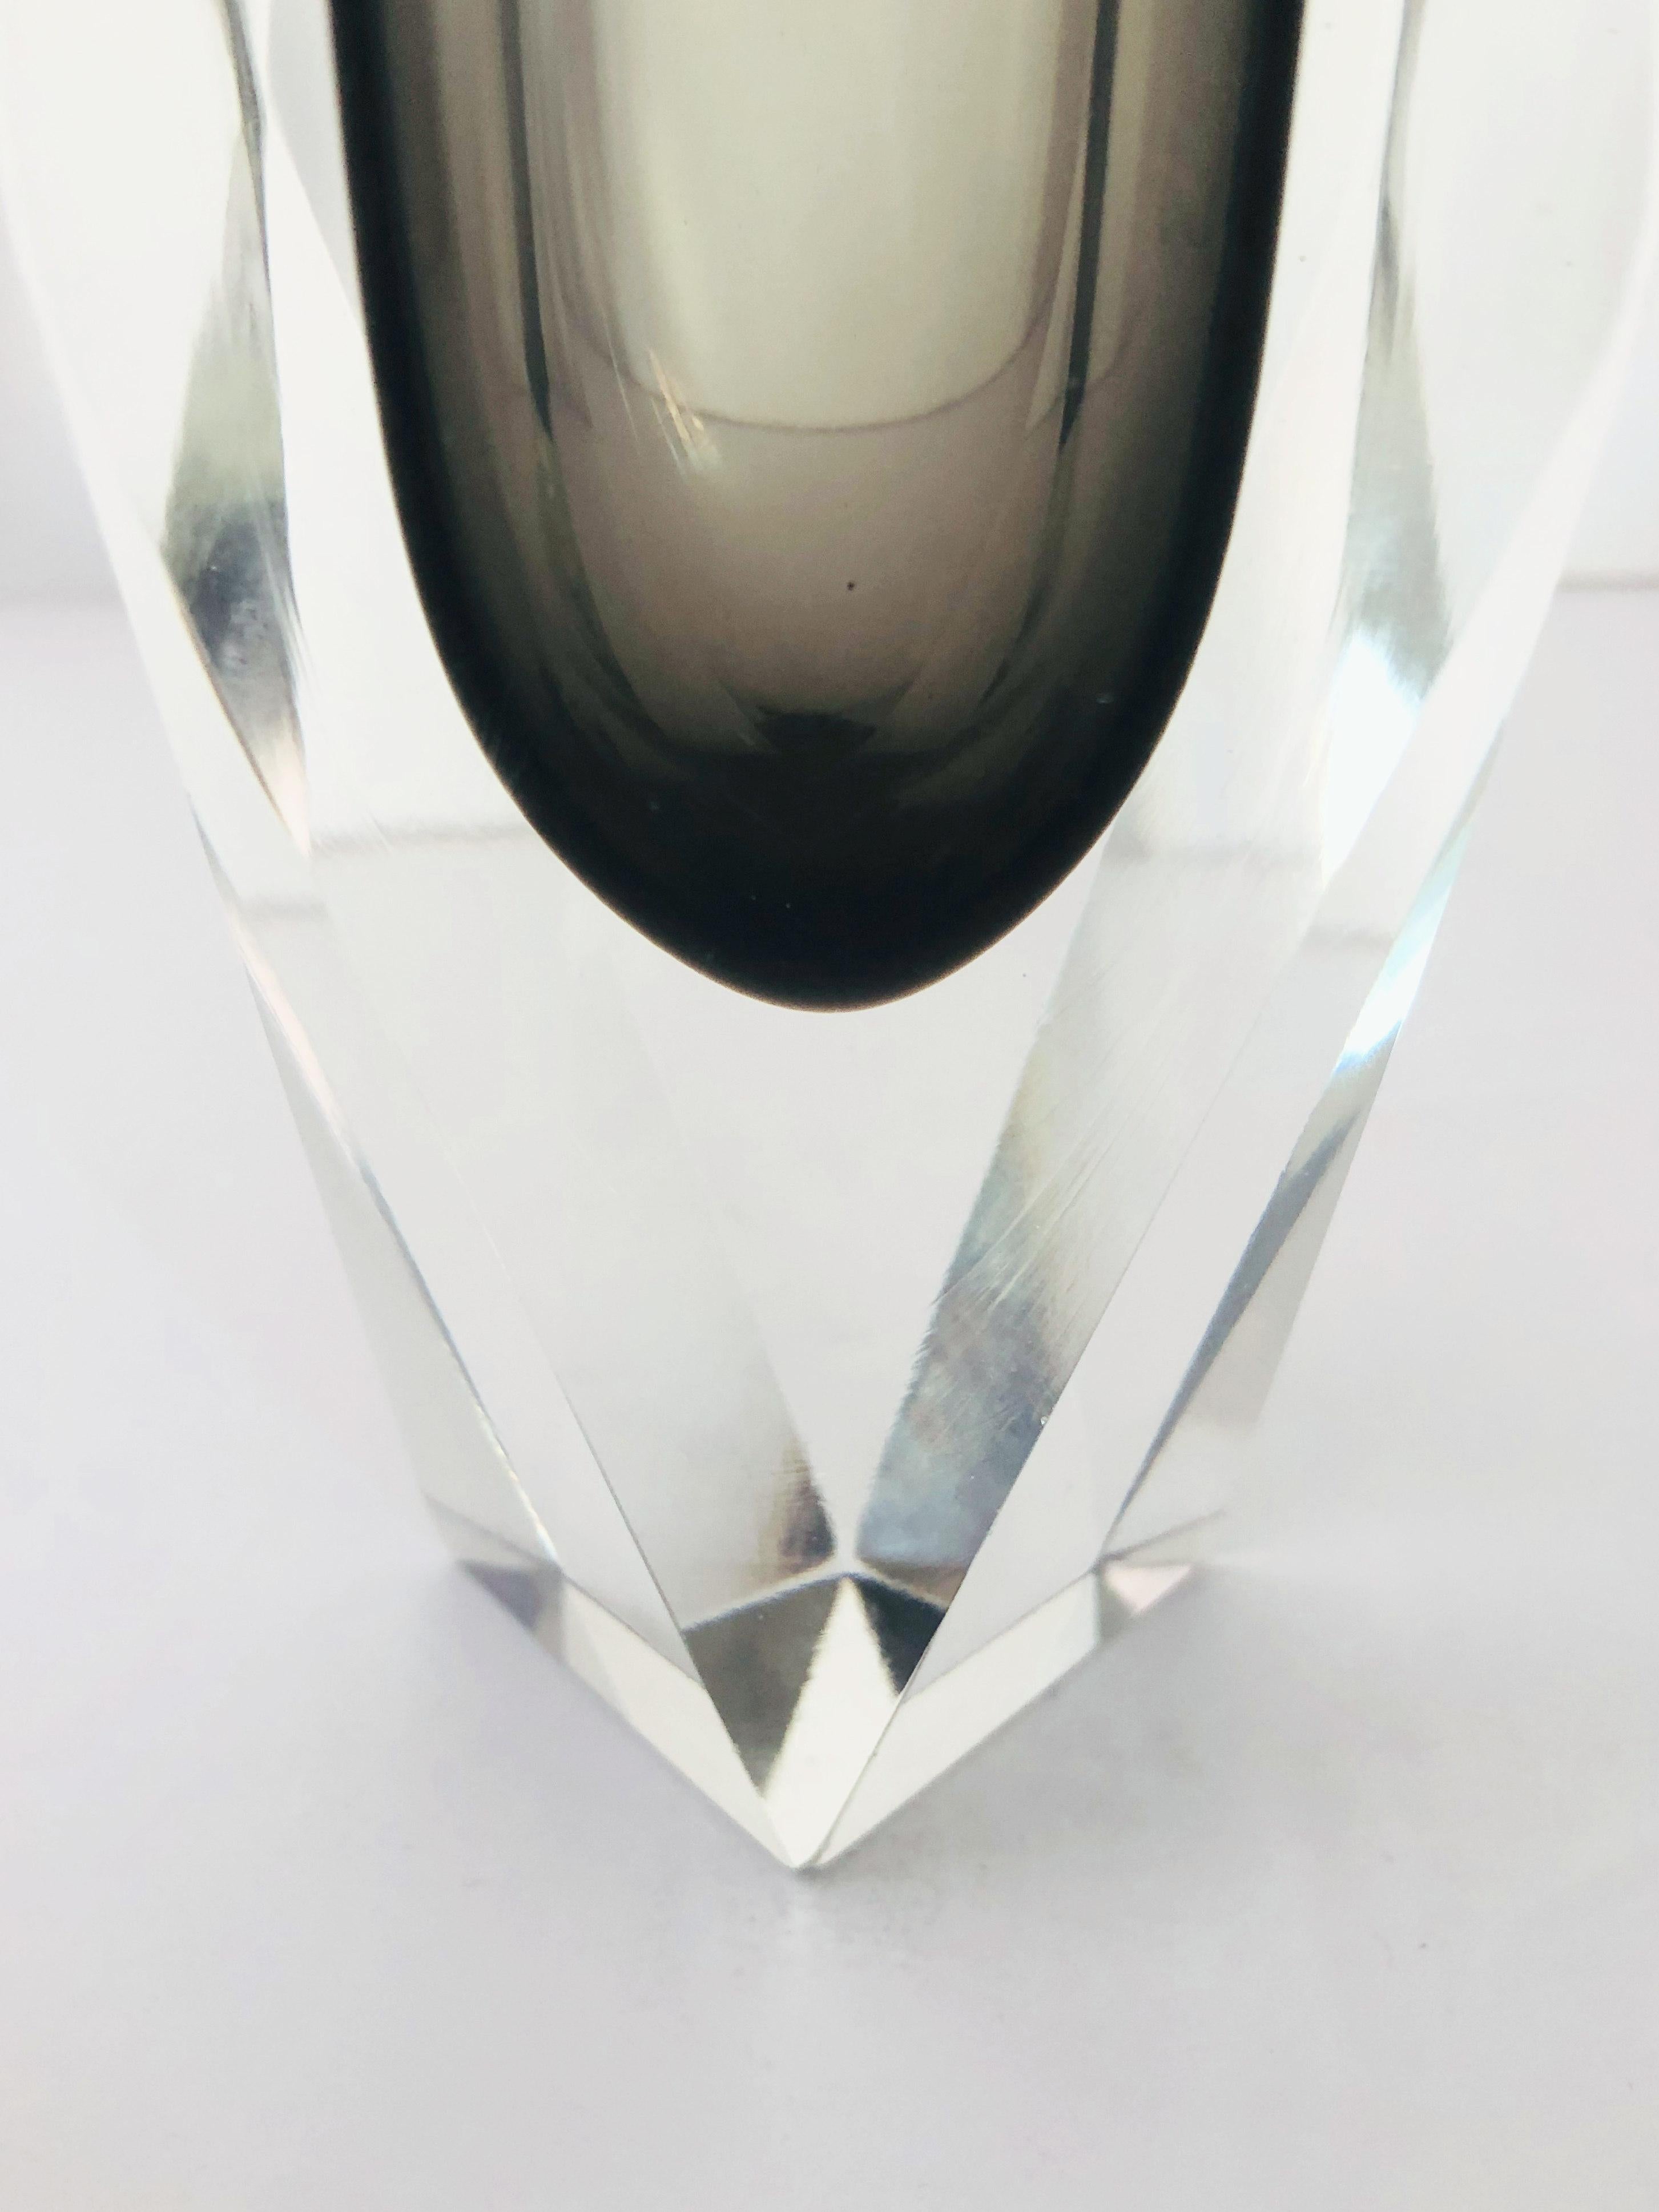 Smoky Faceted Sommerso Vase by Mandruzzato FINAL CLEARANCE SALE 1